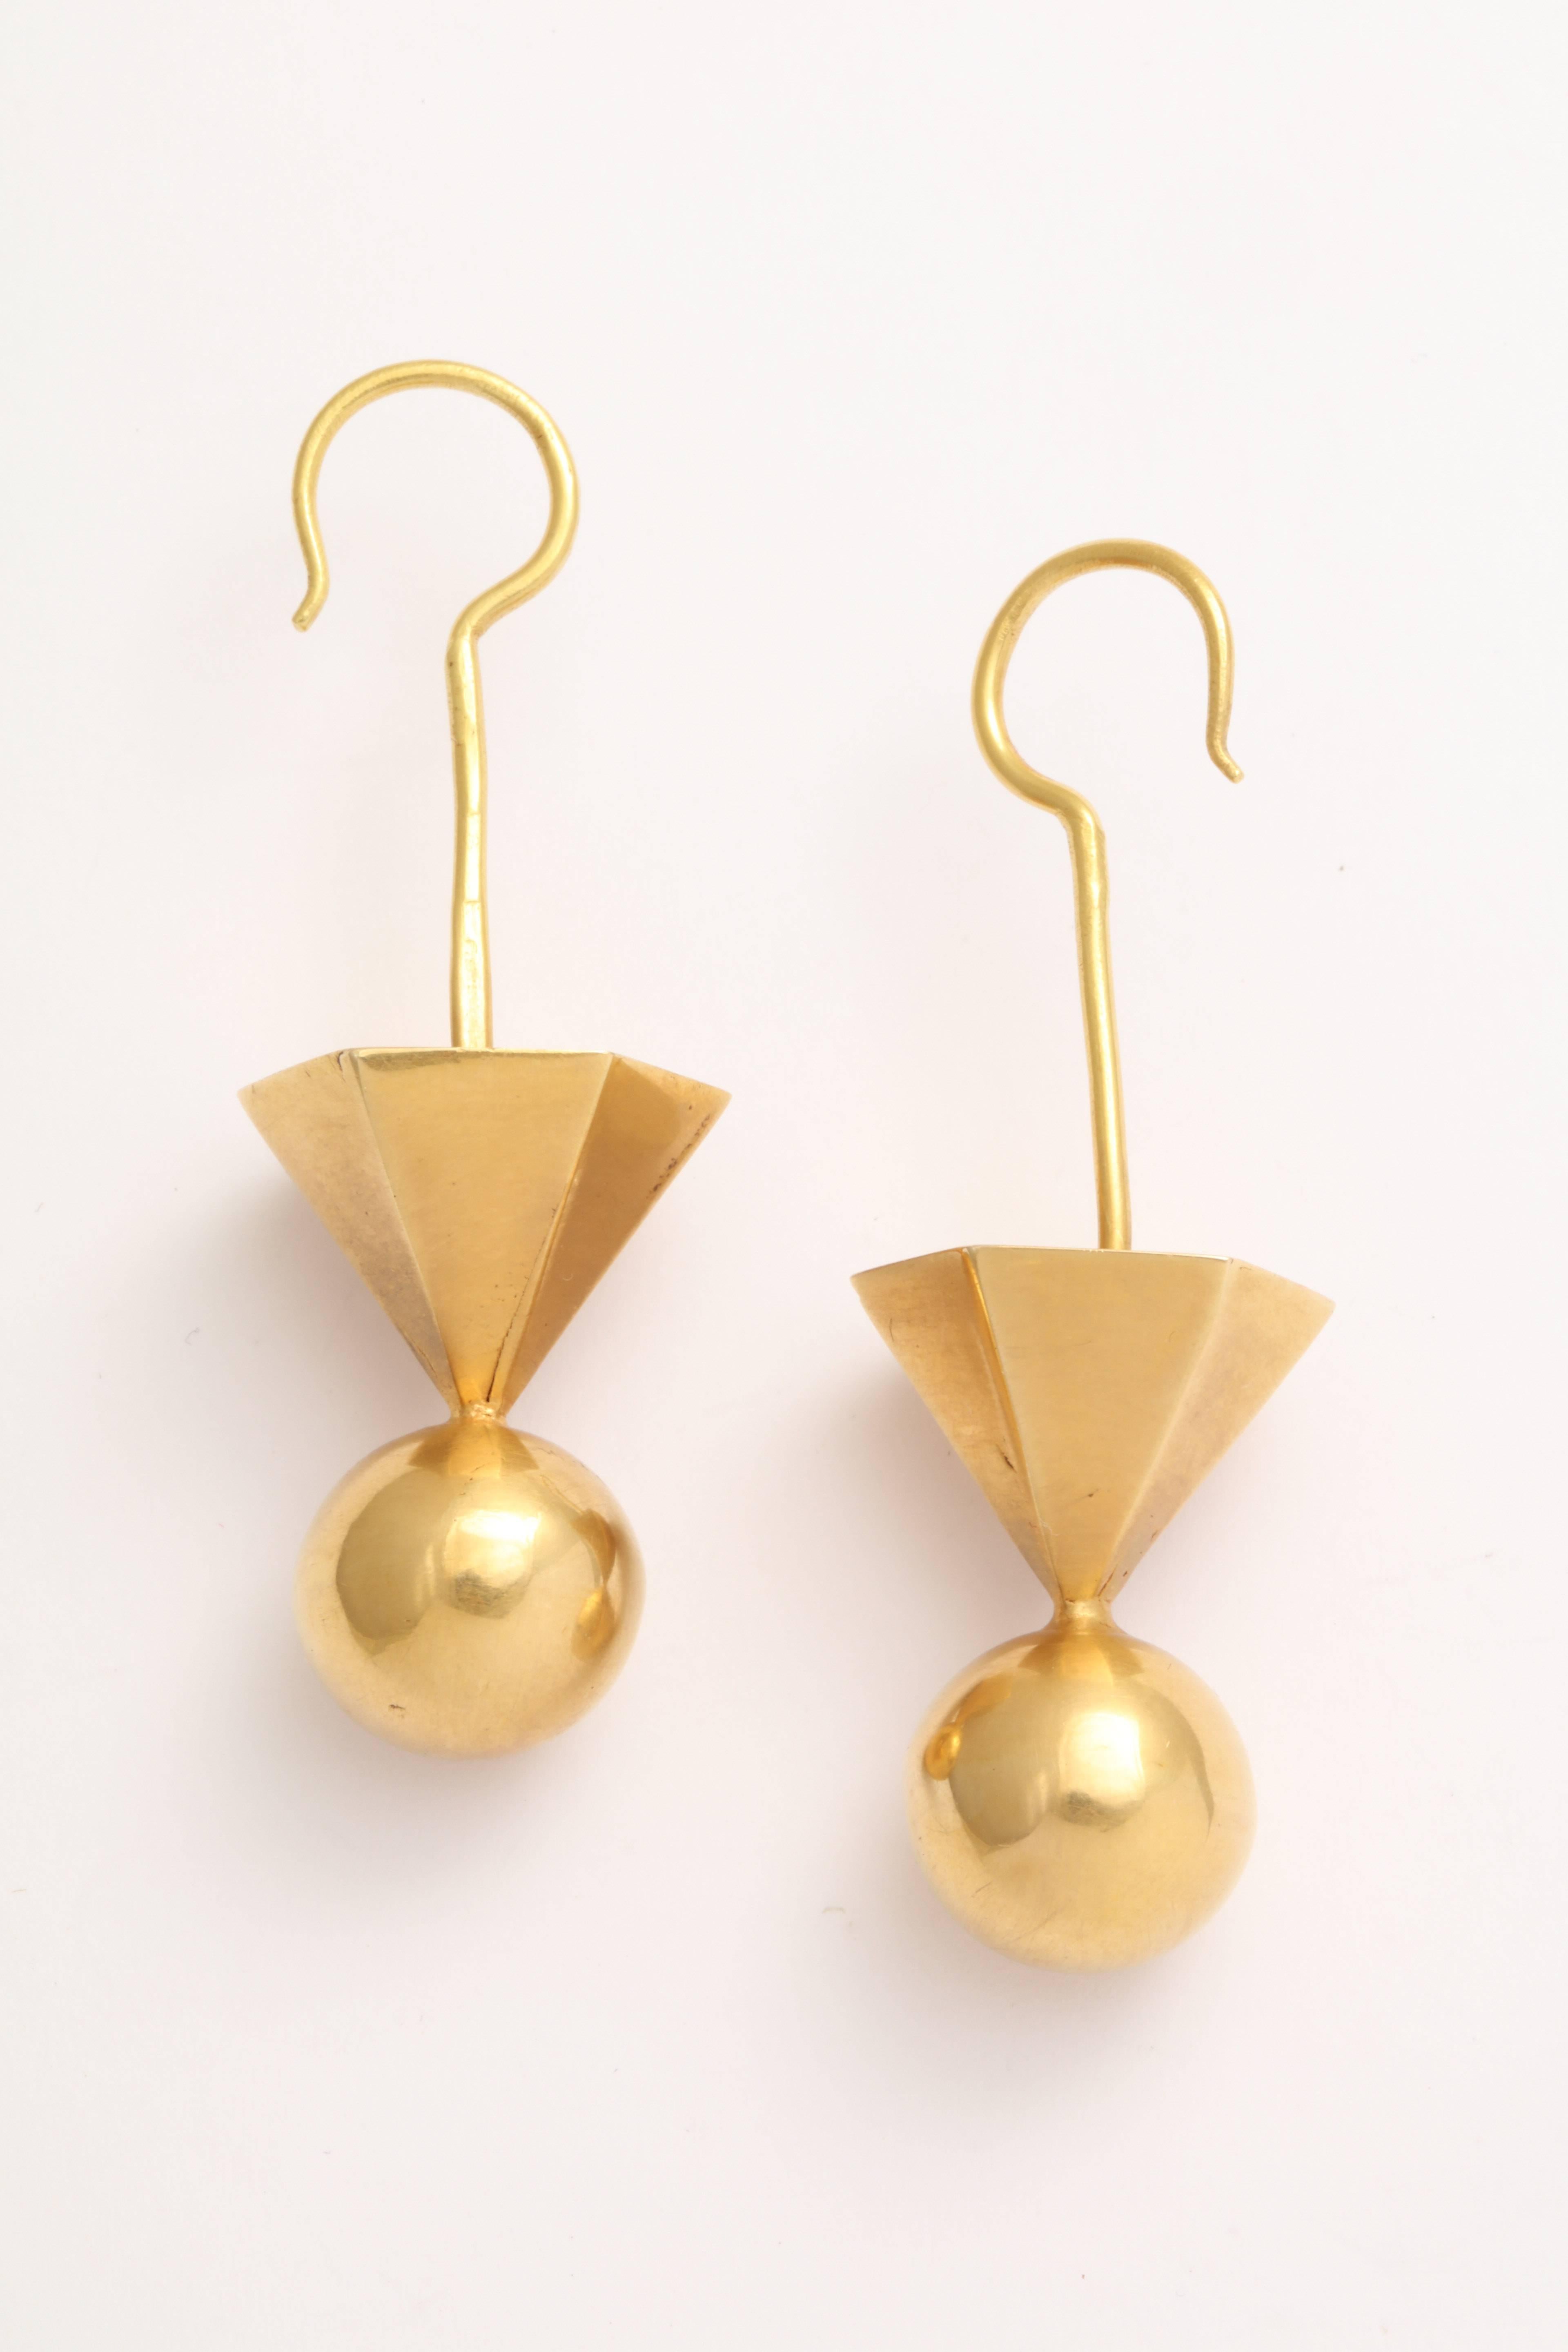 A pair of 18kt yellow gold tribal earrings

Length:2.30 inches
Width: .80 inch